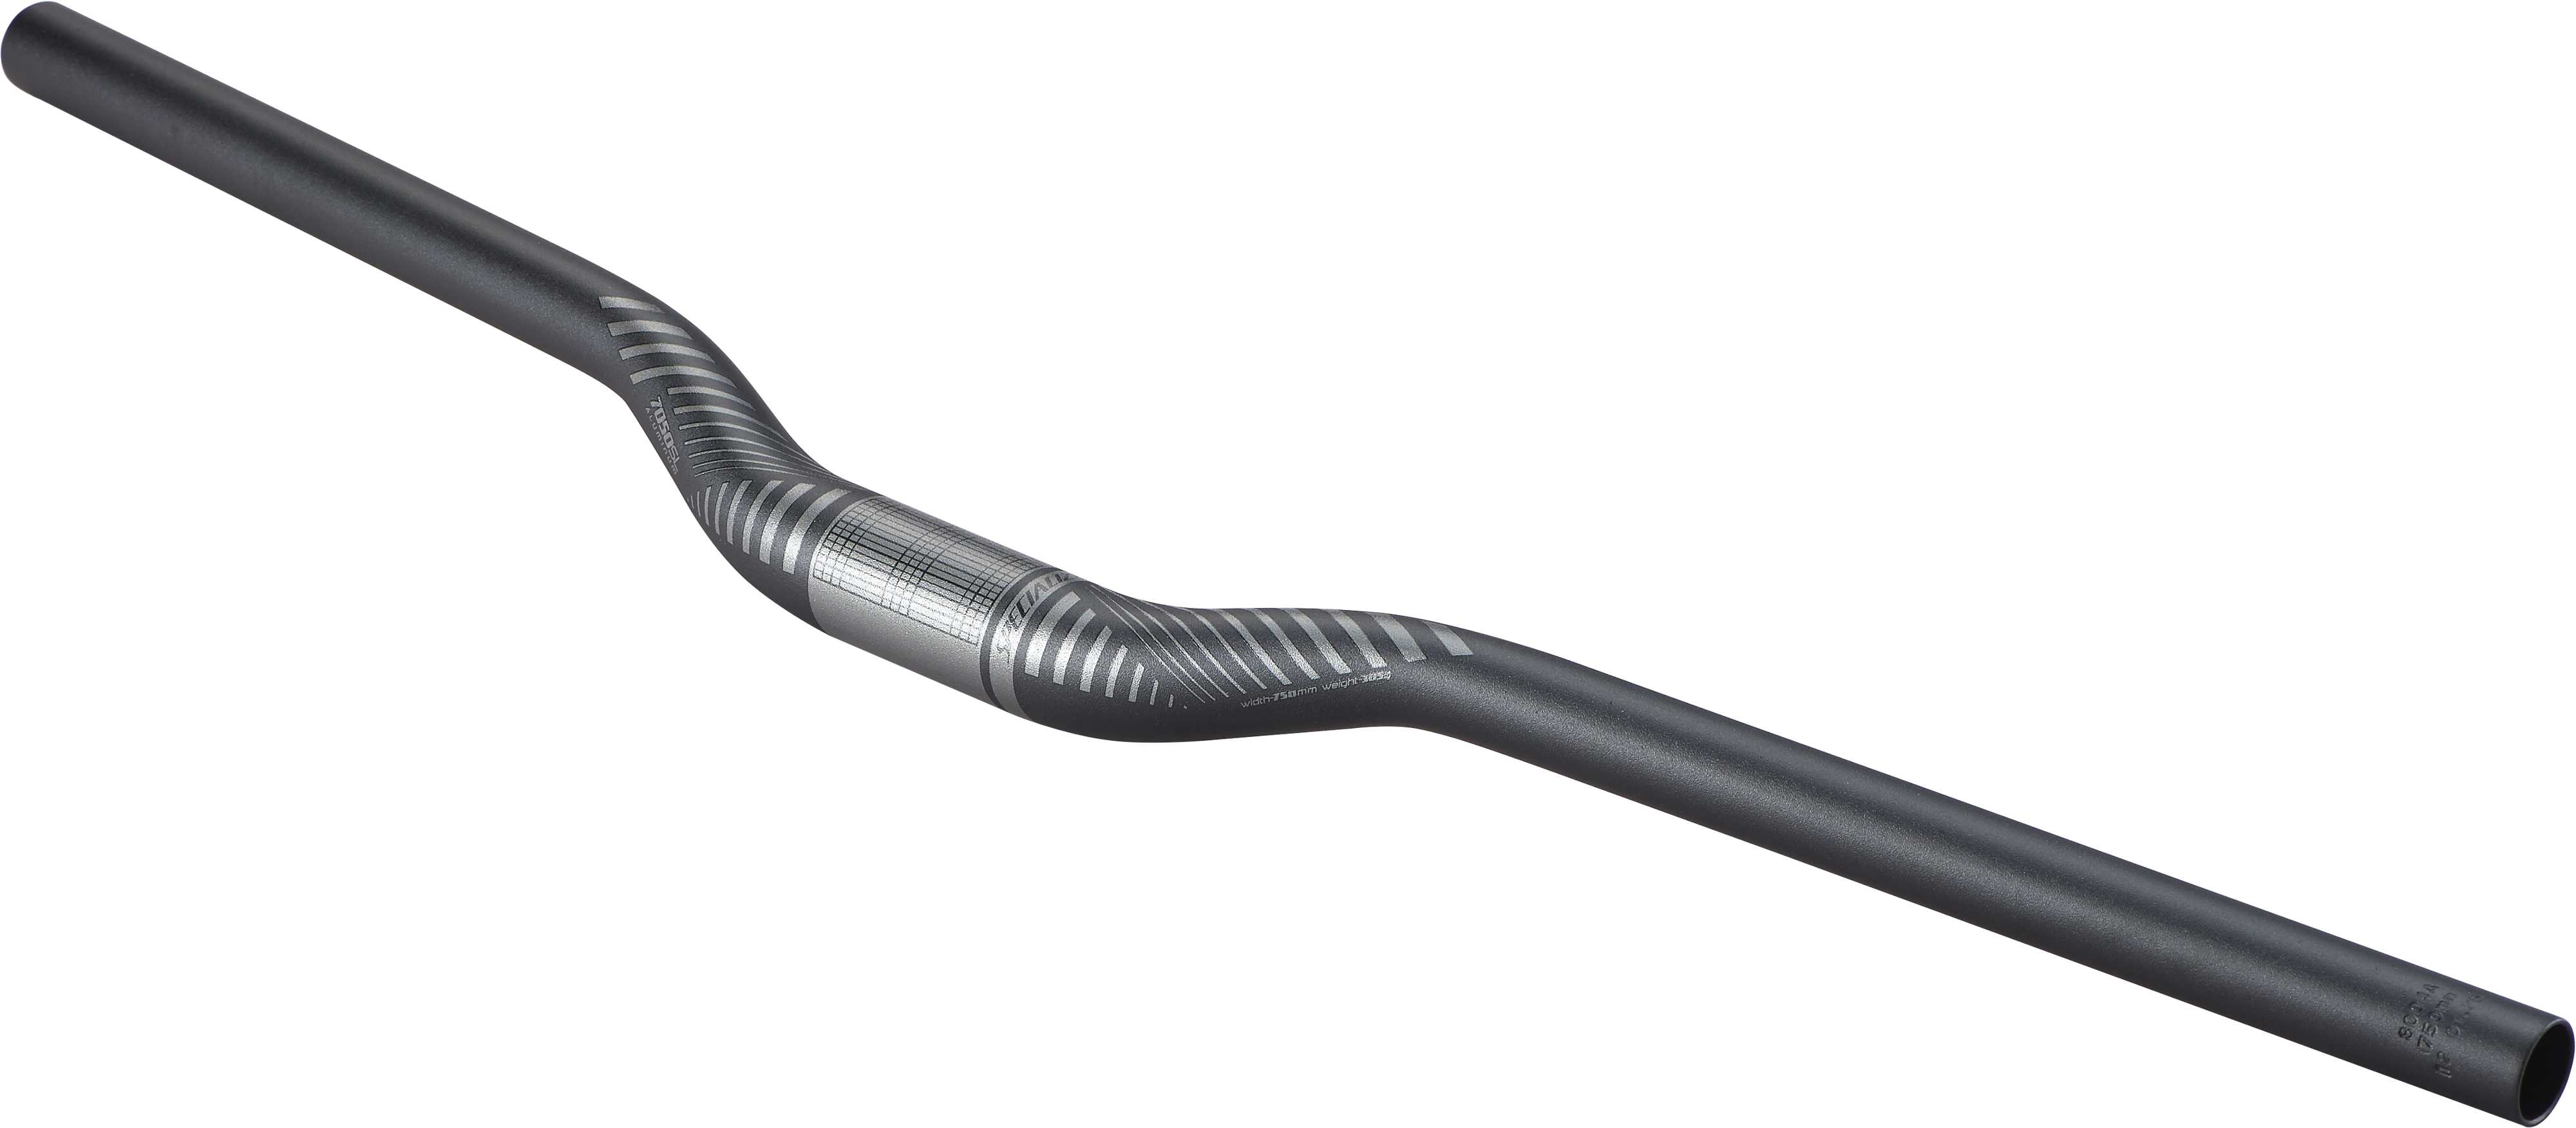 Alloy Low Rise Handlebars | Specialized.com